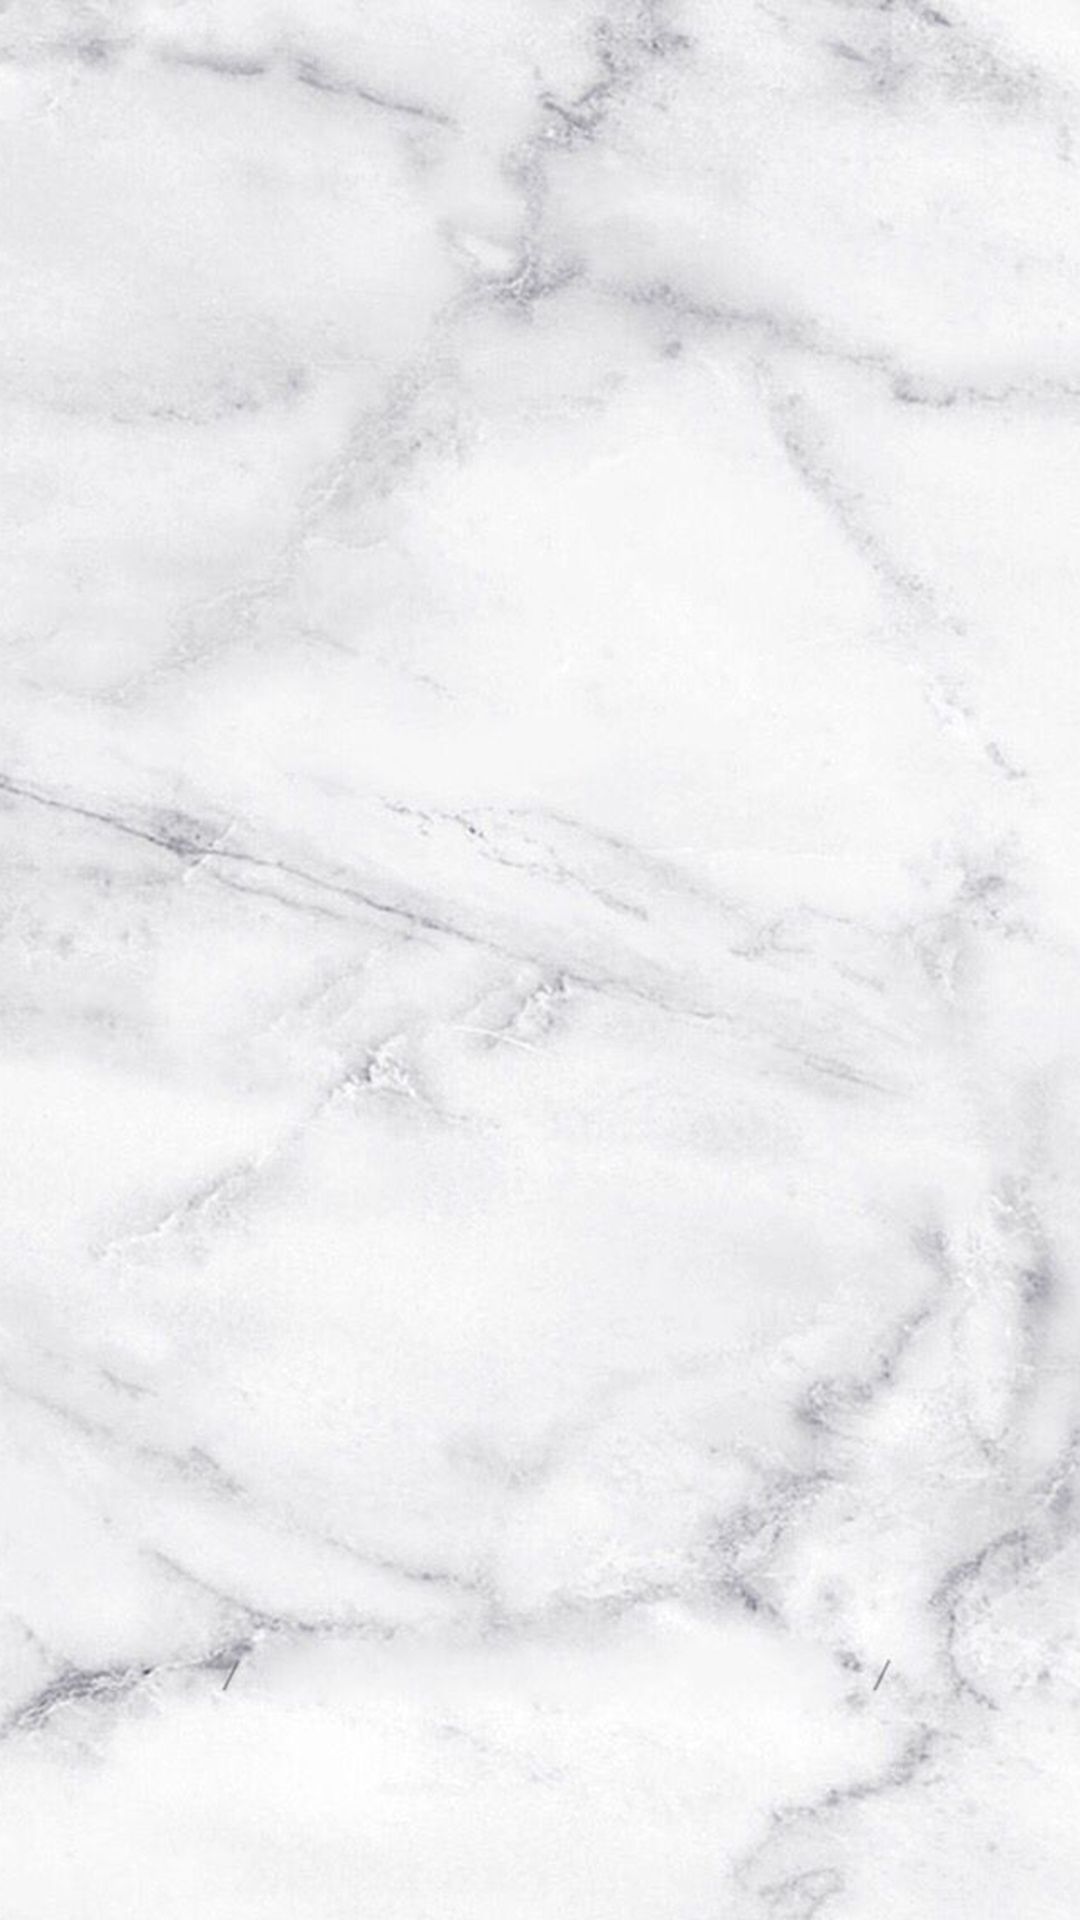 White marble background iPhone 8 wallpaper with high-resolution 1080x1920 pixel. You can use this wallpaper for your iPhone 8 home screen background, iPhone 8 Lock screen wallpaper, iPhone 8 Wallpaper, and another iPhone 8 mobile phone wallpaper - White